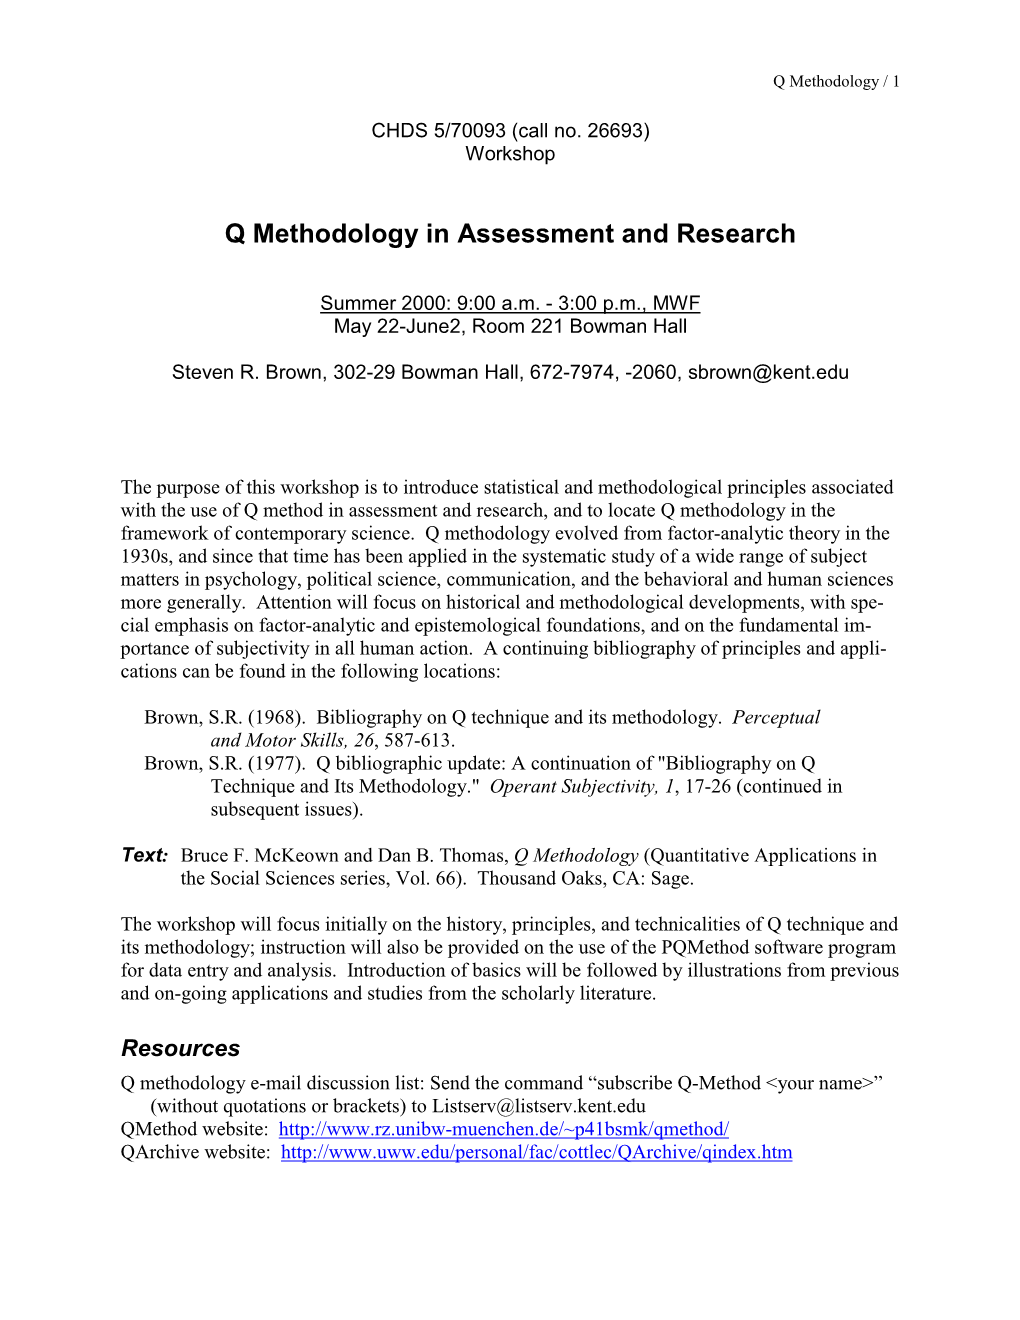 Q Methodology in Assessment and Research